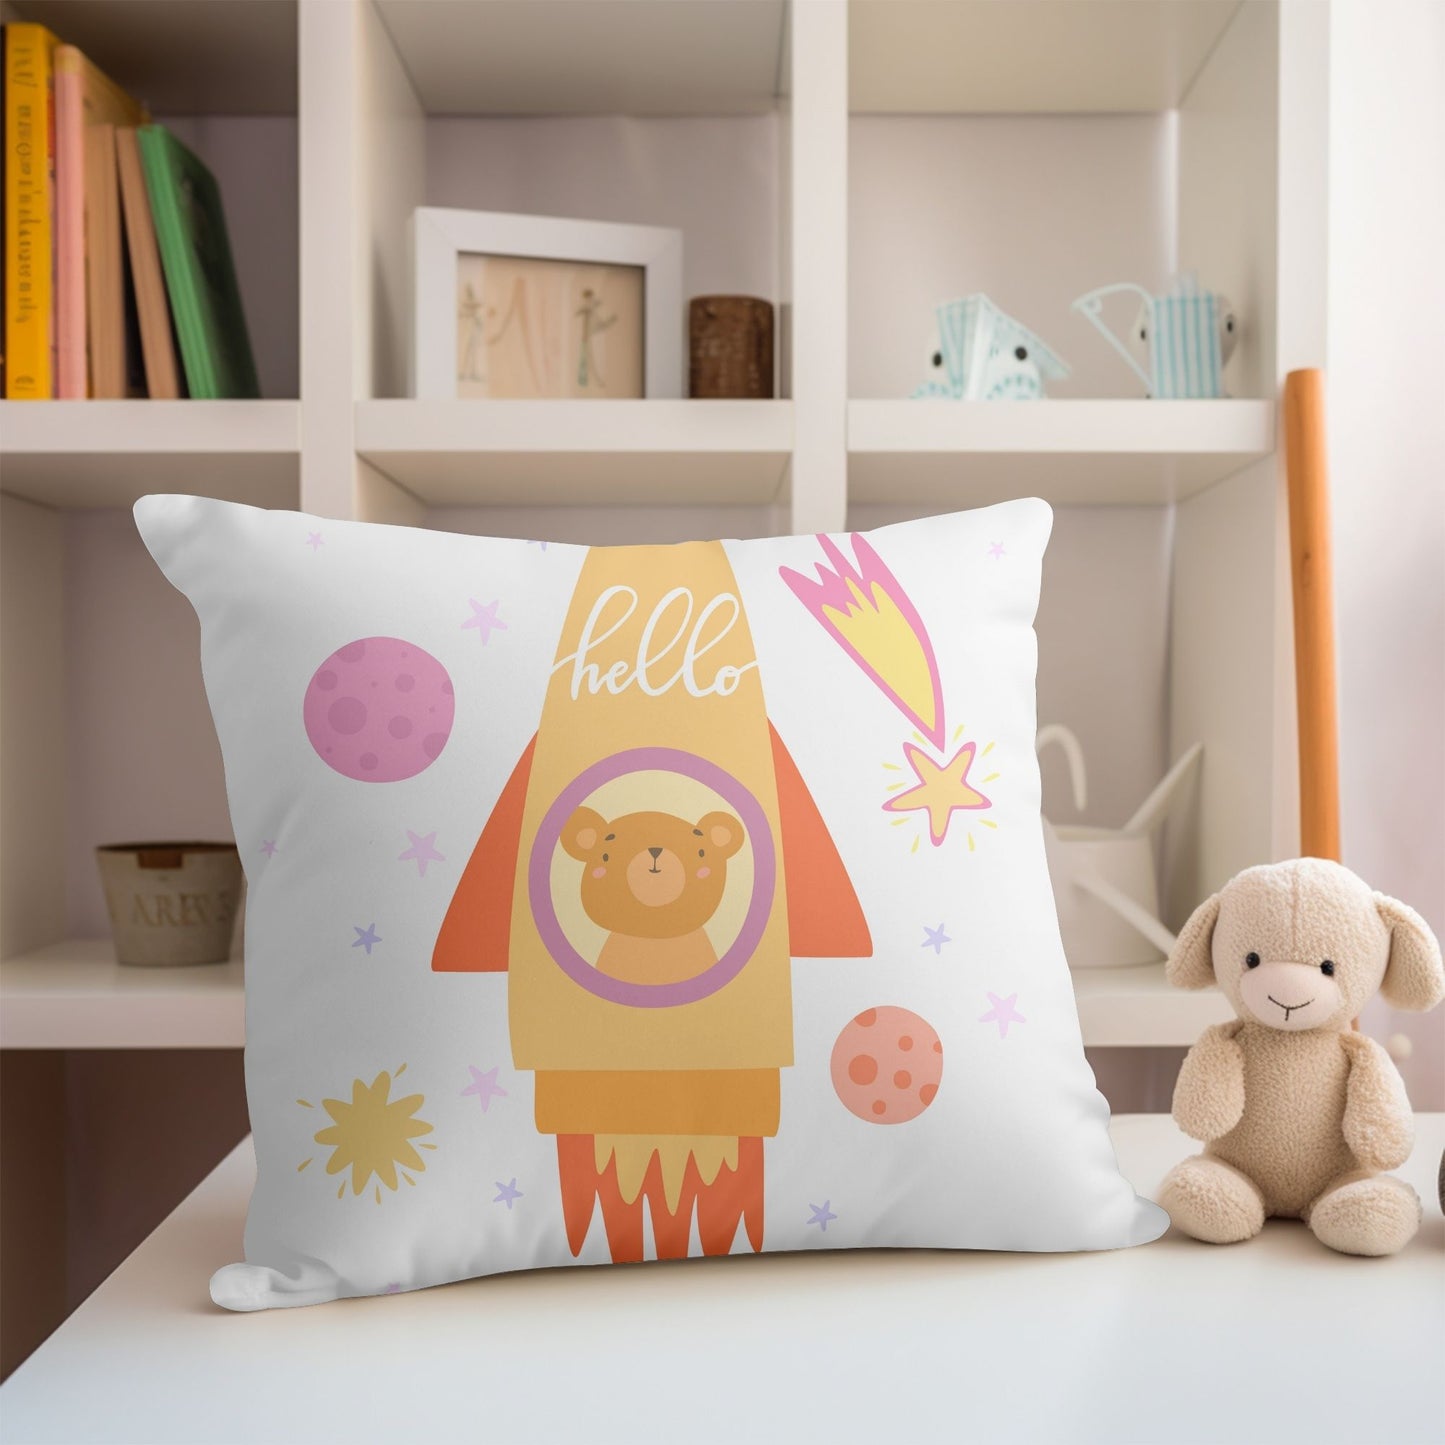 Charming baby pillow with a bear exploring space in a rocket design.